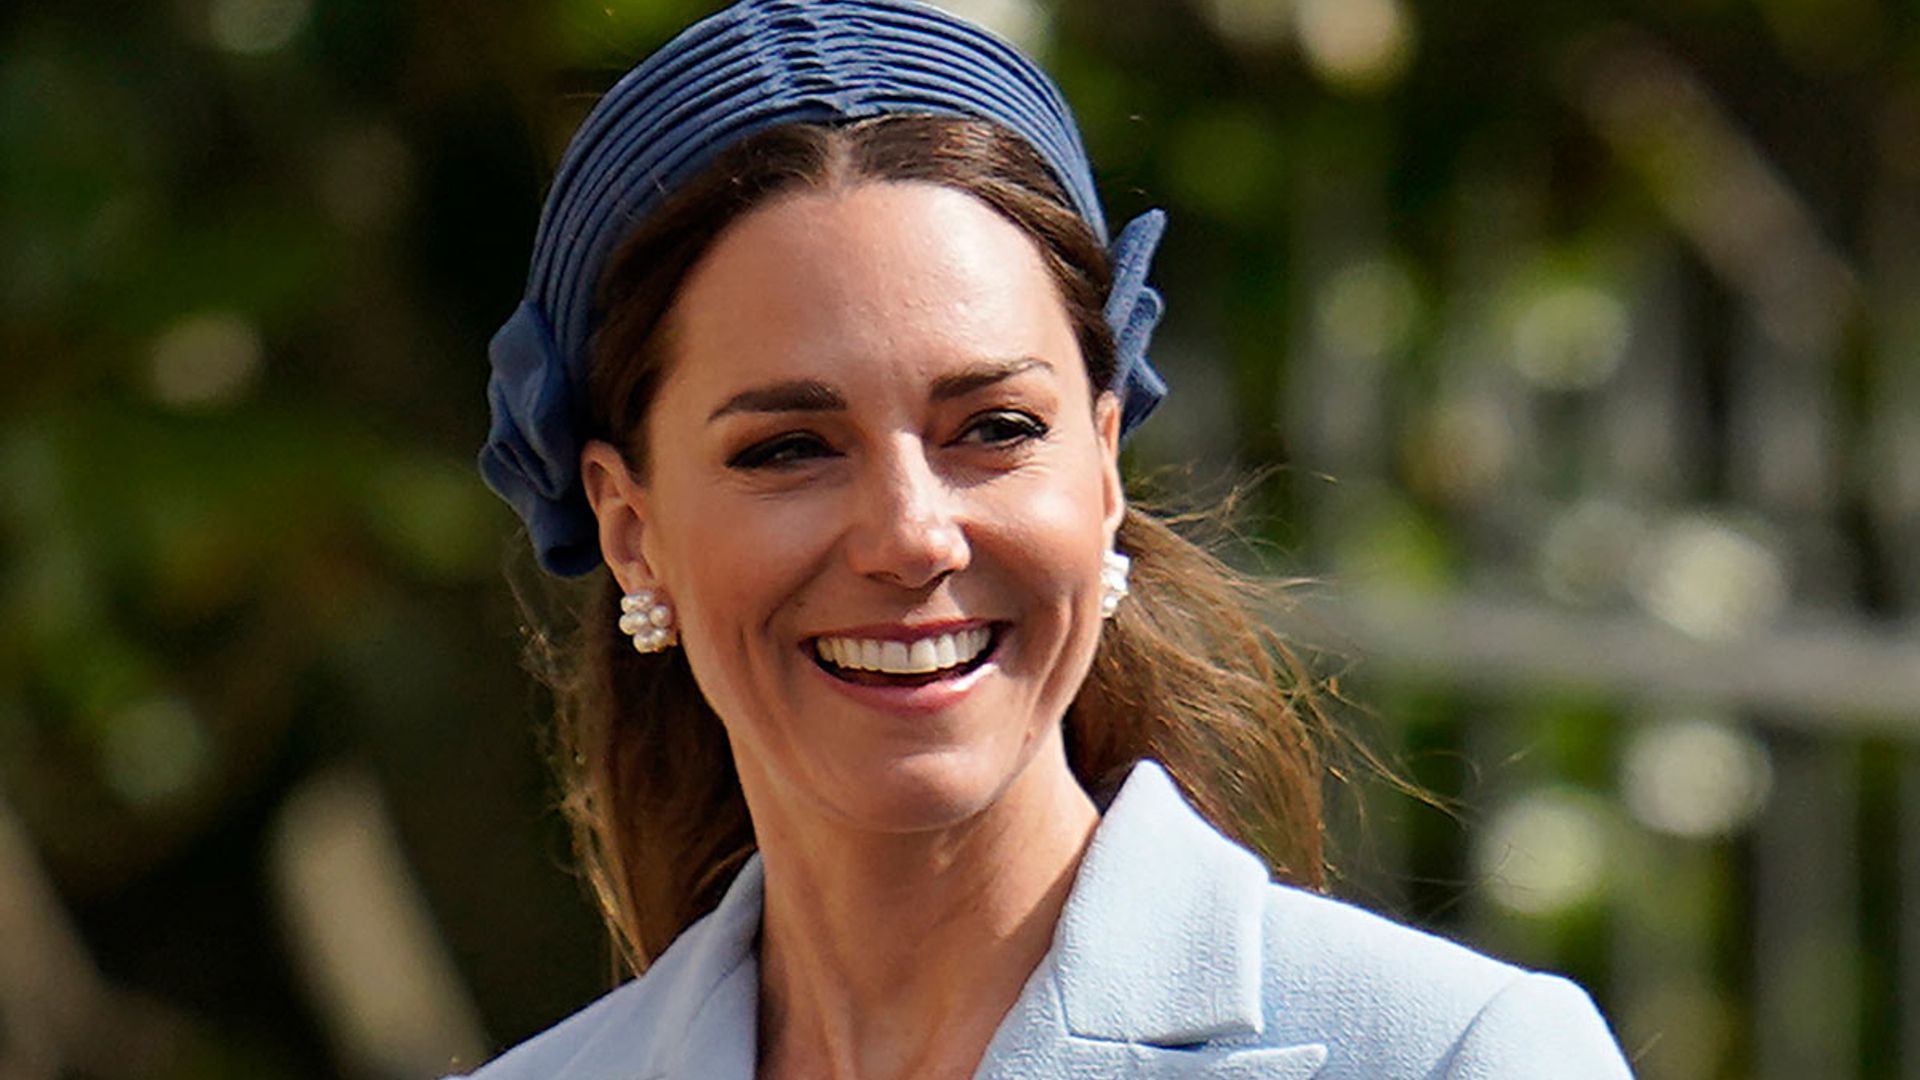 Kate Middleton and Princess Charlotte twin in beautiful blue outfits